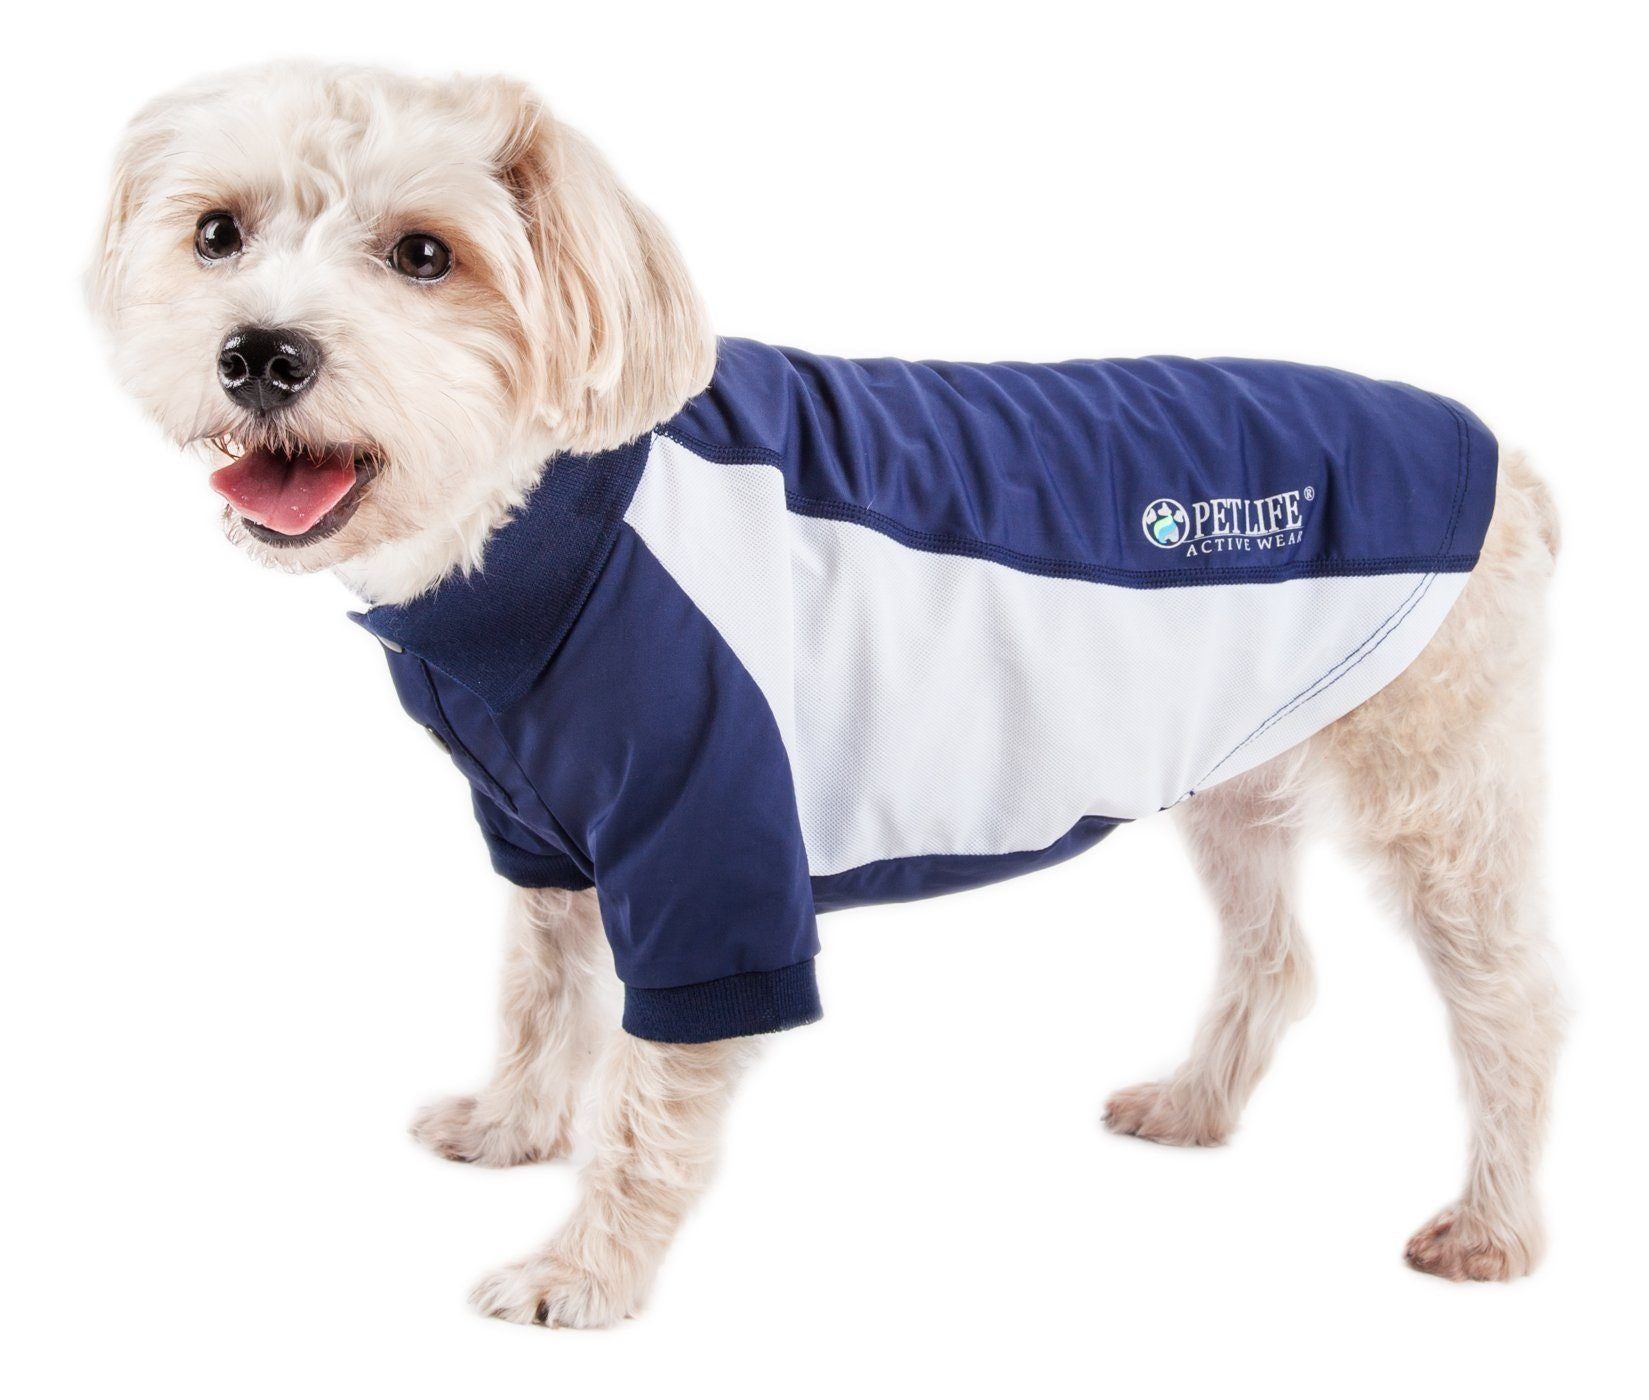 Pet Life ® Active 'Barko Pawlo' Relax-Stretch Quick-Drying Performance Dog Polo T-Shirt X-Small Navy With White